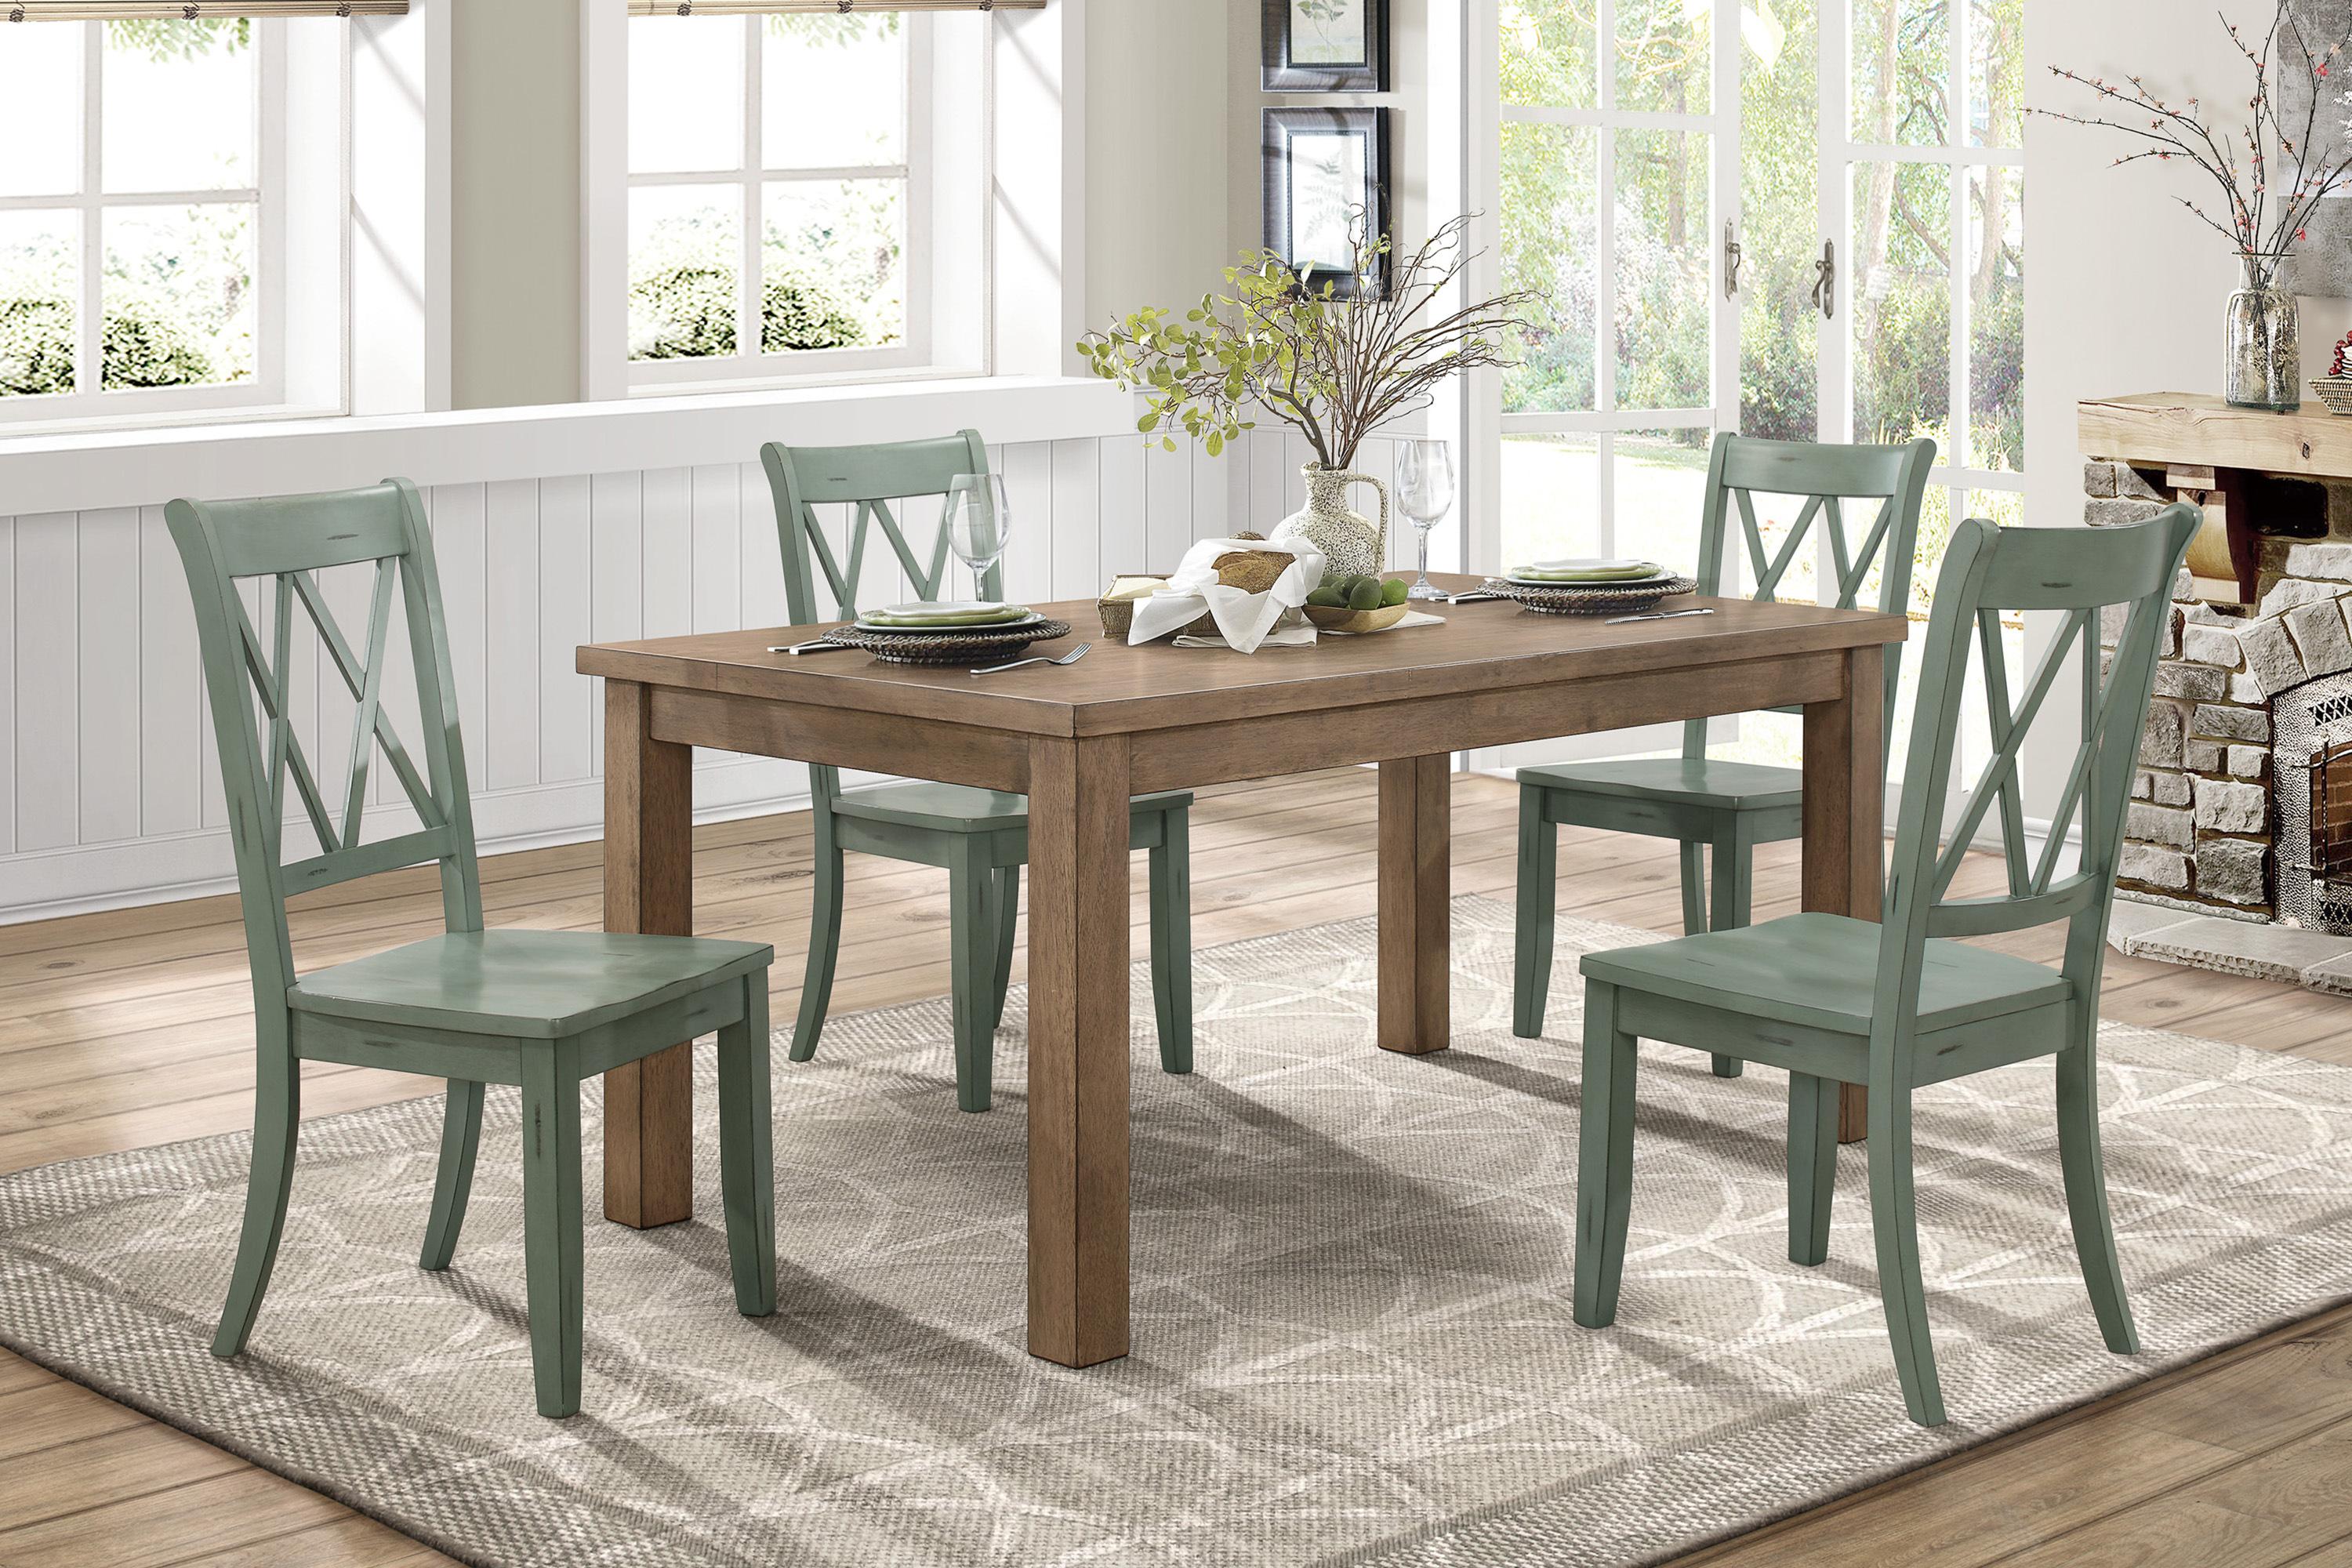 

                    
Homelegance 5516-66-TL*5PC Janina Dining Room Set Teal  Purchase 
